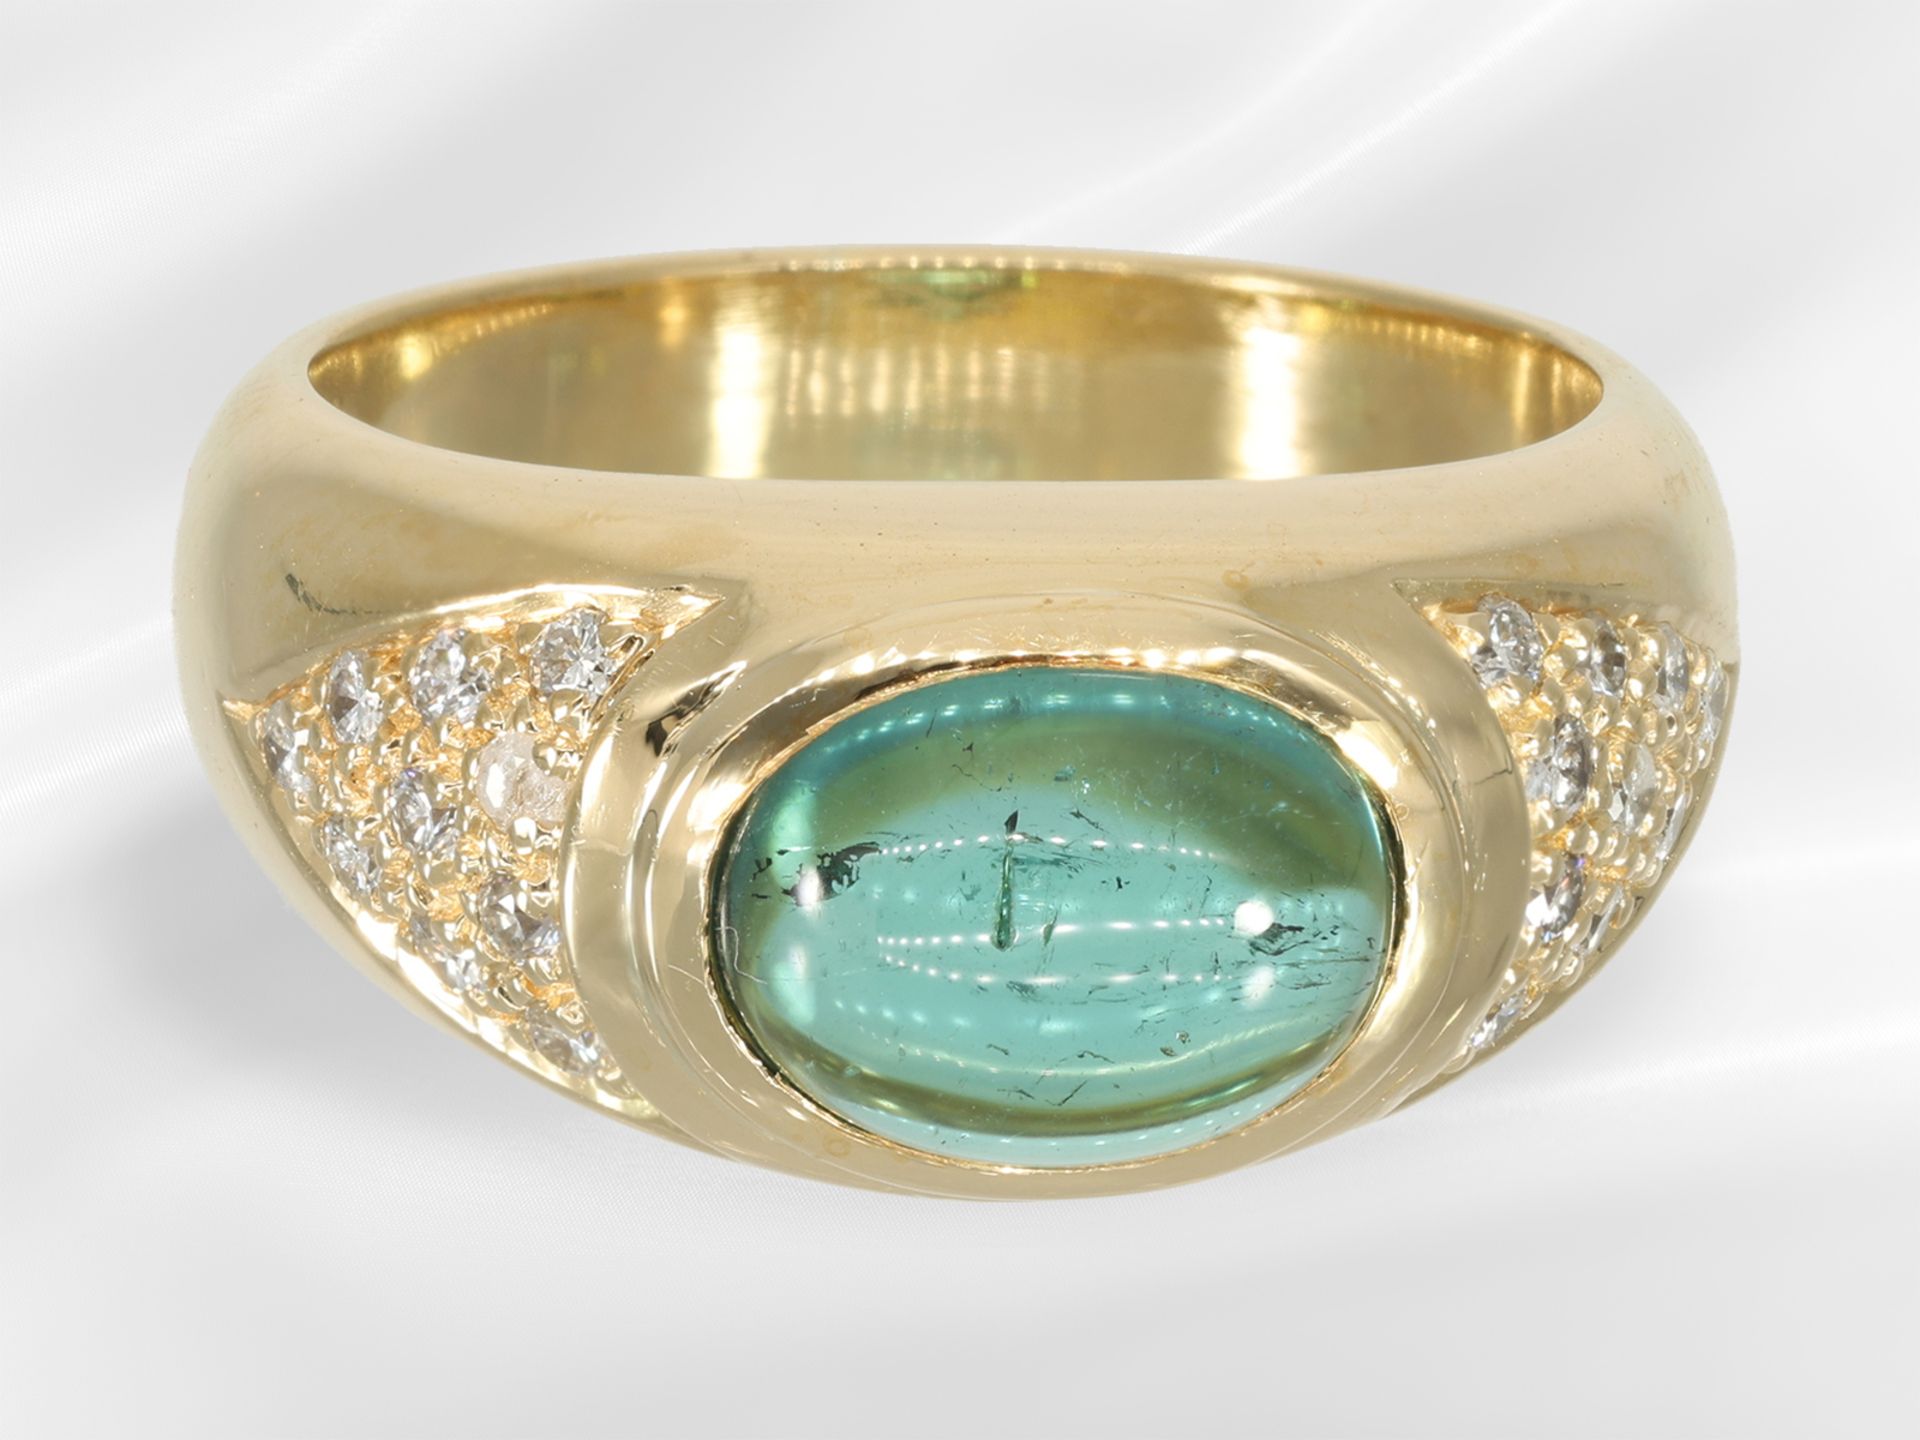 Ring: heavy gold jewellery ring set with brilliant-cut diamonds and tourmaline - Image 4 of 5